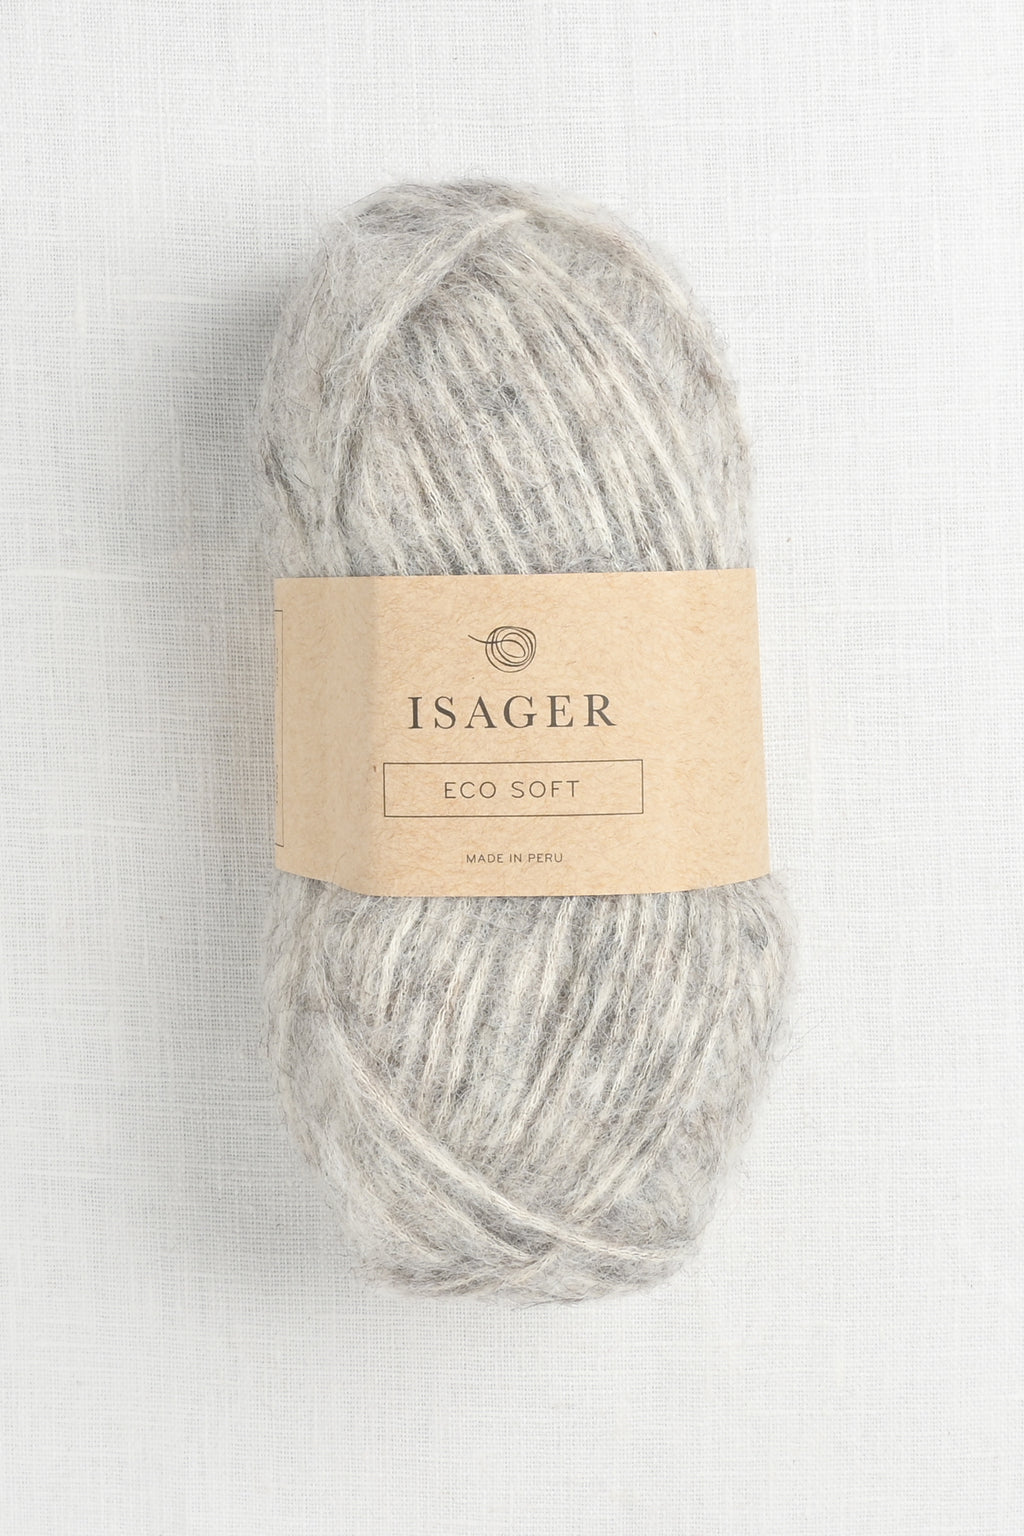 Isager Eco Soft E2S Light Grey Undyed (Discontinued)